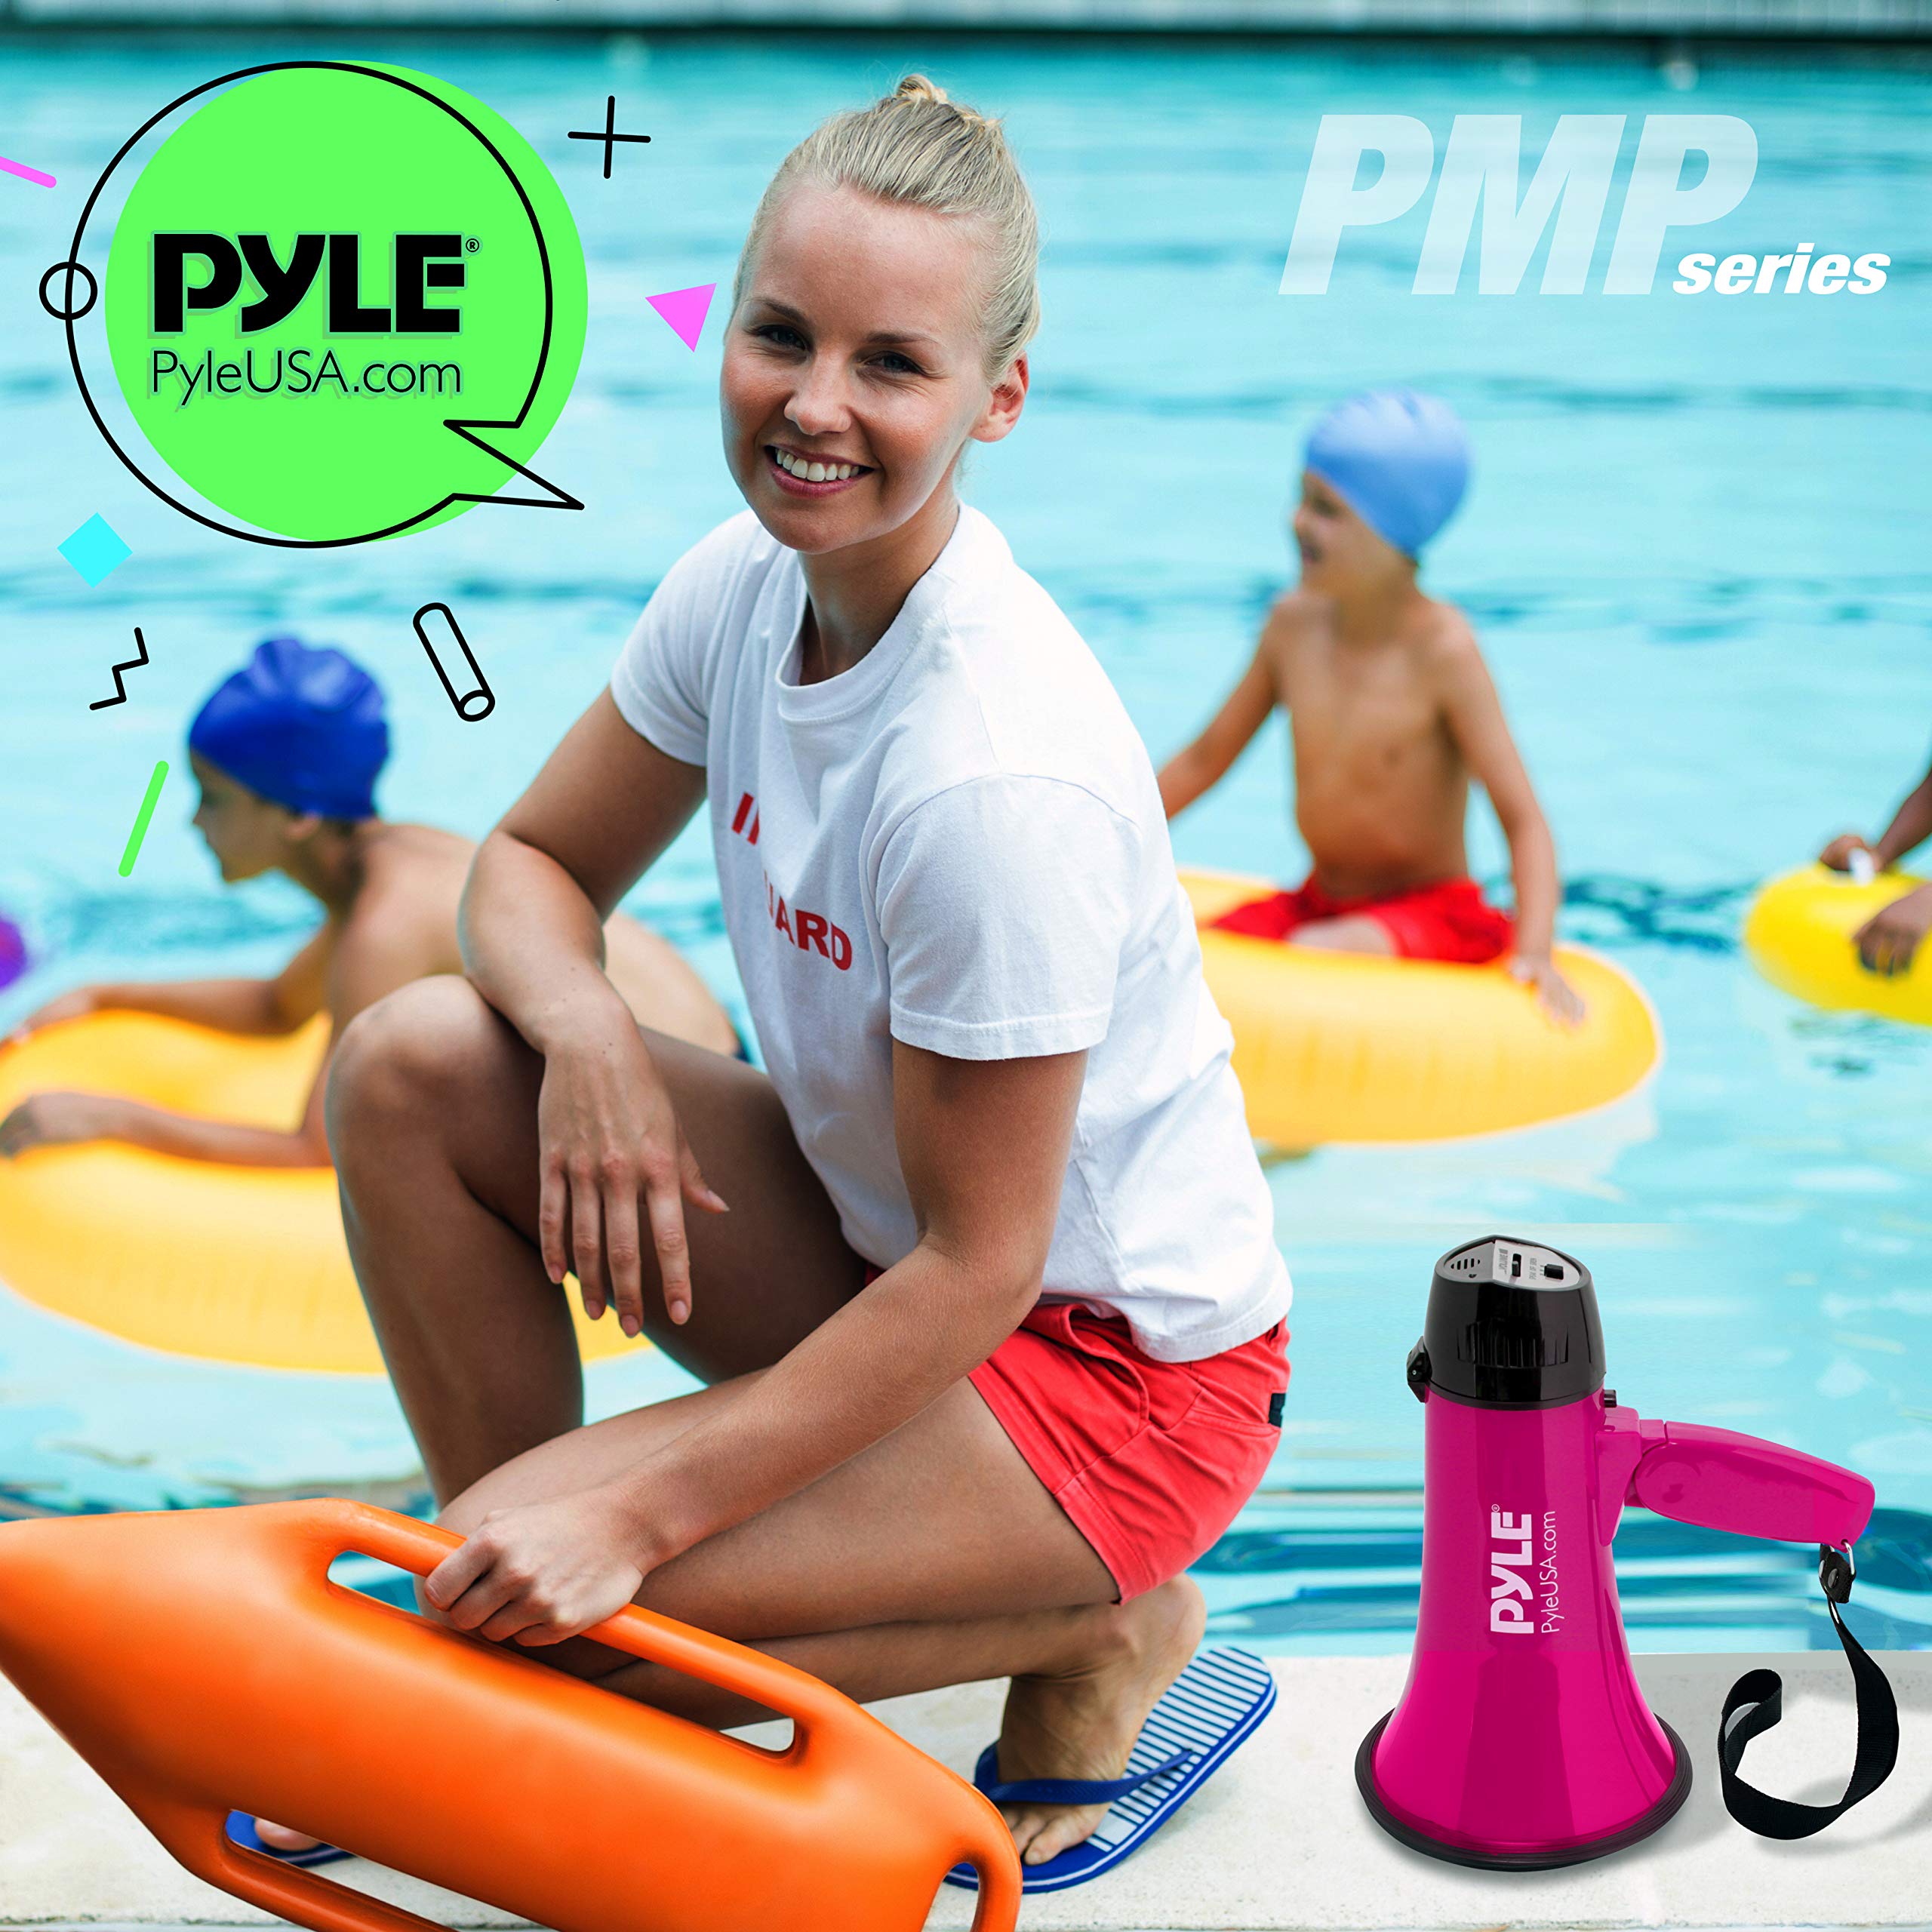 PYLE-PRO Portable Megaphone Speaker Siren Bullhorn - Compact and Battery Operated with 20 Watt Power, Microphone, 2 Modes, PA Sound and Foldable Handle for Cheerleading and Police Use PMP24PK (Pink)